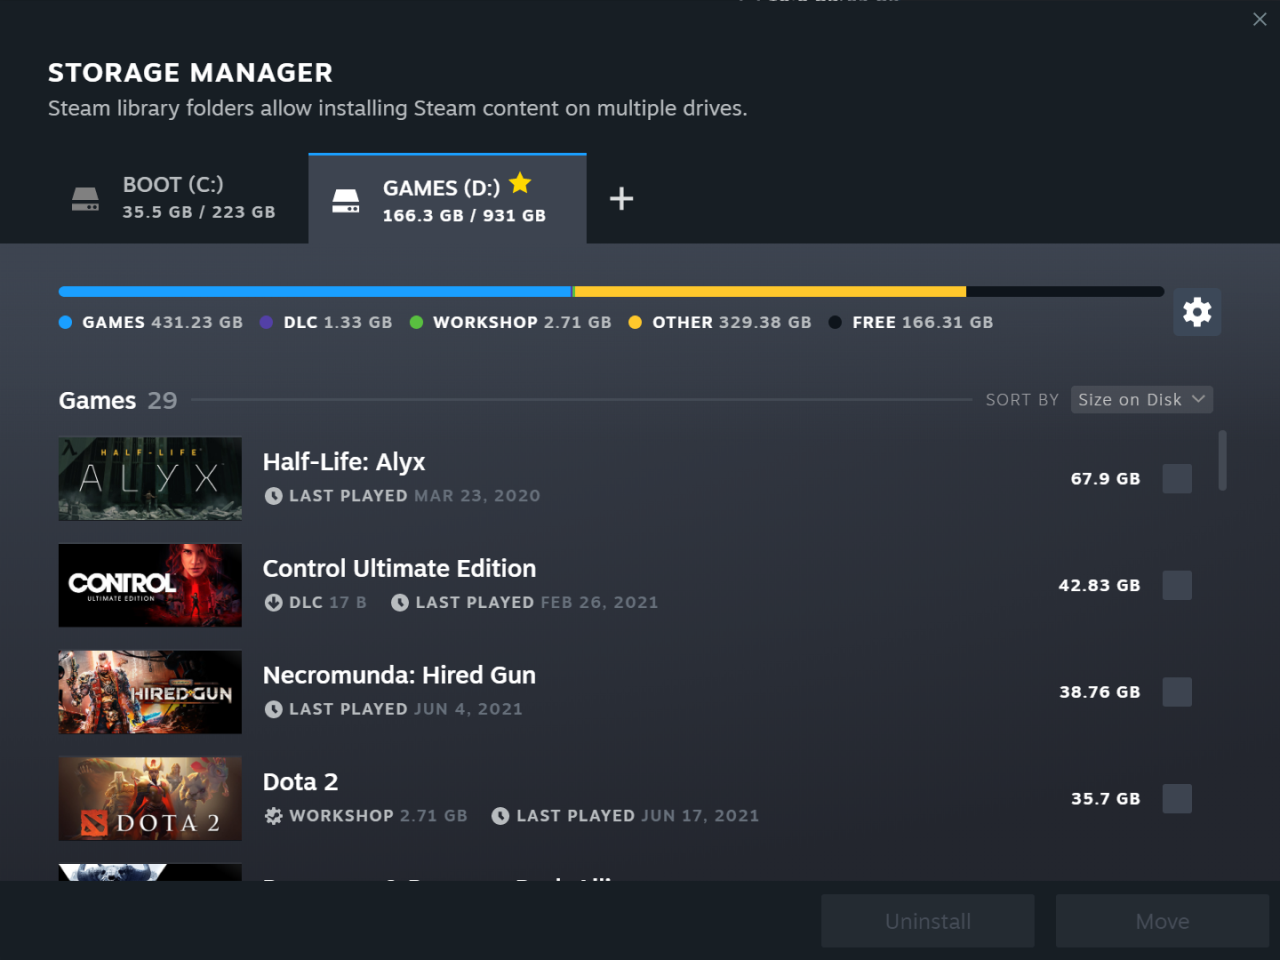 Steam's redesigned Downloads and Storage Management pages launch